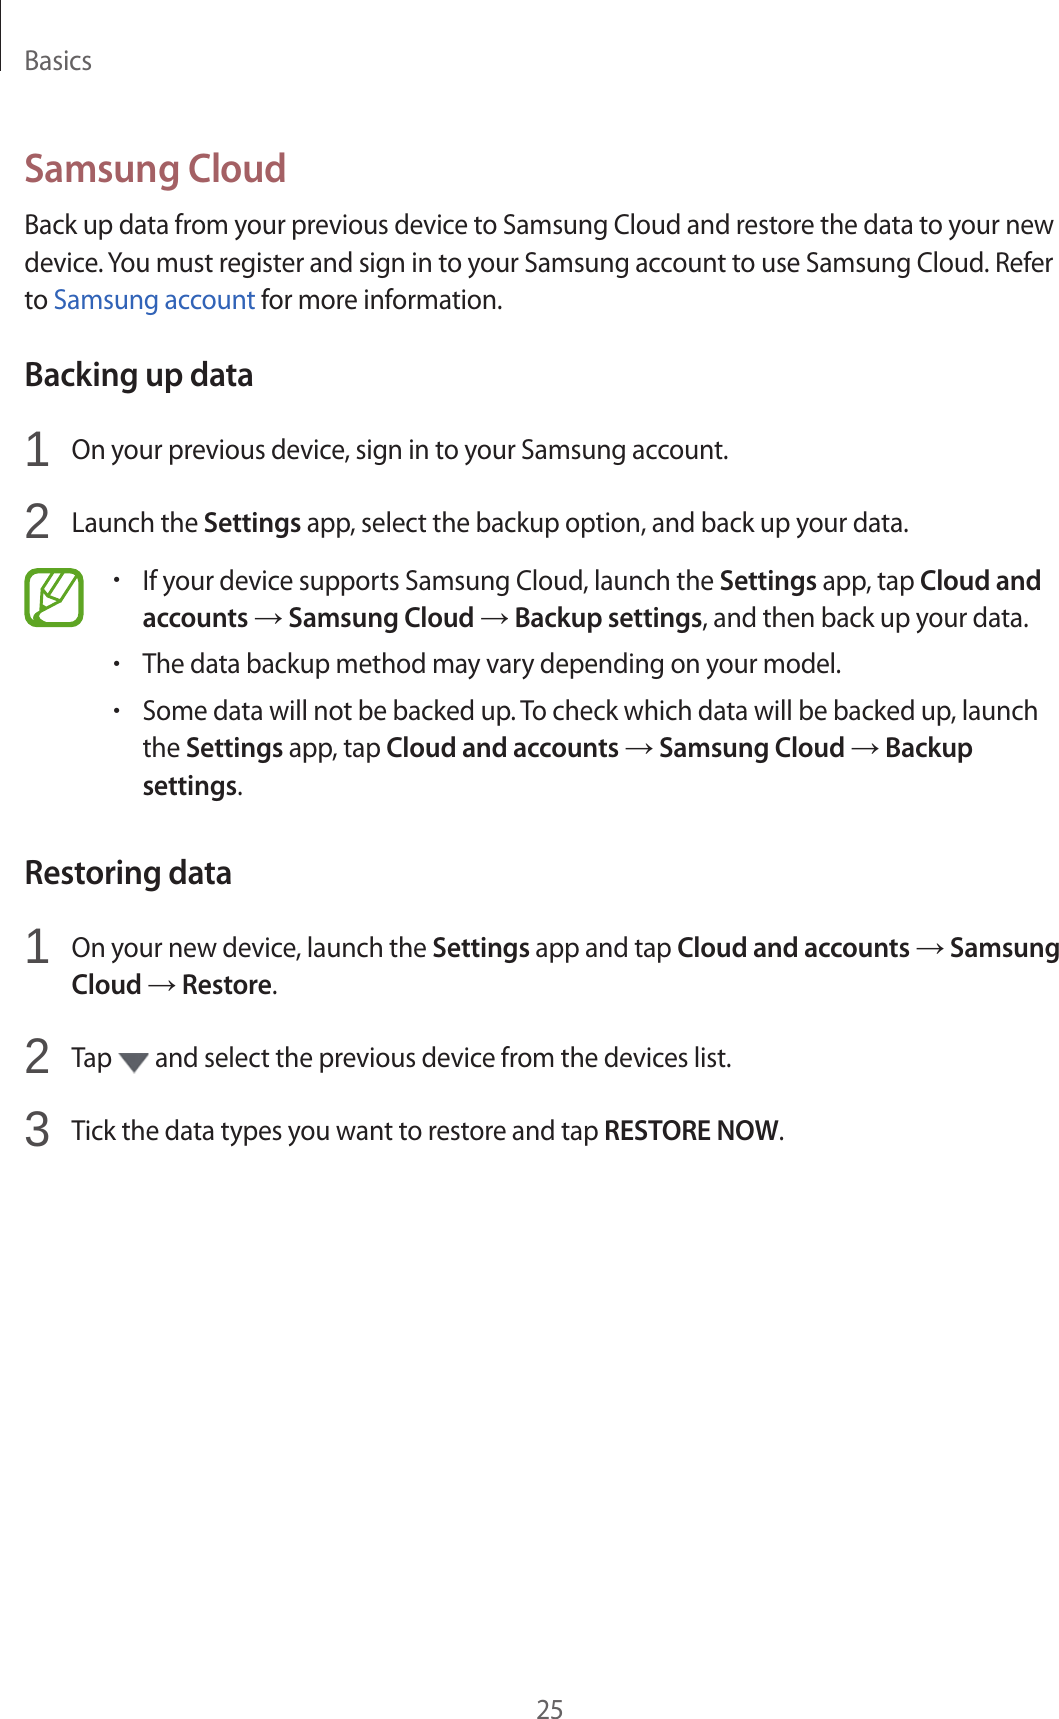 Basics25Samsung CloudBack up data from your previous device to Samsung Cloud and restore the data to your new device. You must register and sign in to your Samsung account to use Samsung Cloud. Refer to Samsung account for more information.Backing up data1  On your previous device, sign in to your Samsung account.2  Launch the Settings app, select the backup option, and back up your data.•If your device supports Samsung Cloud, launch the Settings app, tap Cloud and accounts → Samsung Cloud → Backup settings, and then back up your data.•The data backup method may vary depending on your model.•Some data will not be backed up. To check which data will be backed up, launch the Settings app, tap Cloud and accounts → Samsung Cloud → Backup settings.Restoring data1  On your new device, launch the Settings app and tap Cloud and accounts → Samsung Cloud → Restore.2  Tap   and select the previous device from the devices list.3  Tick the data types you want to restore and tap RESTORE NOW.